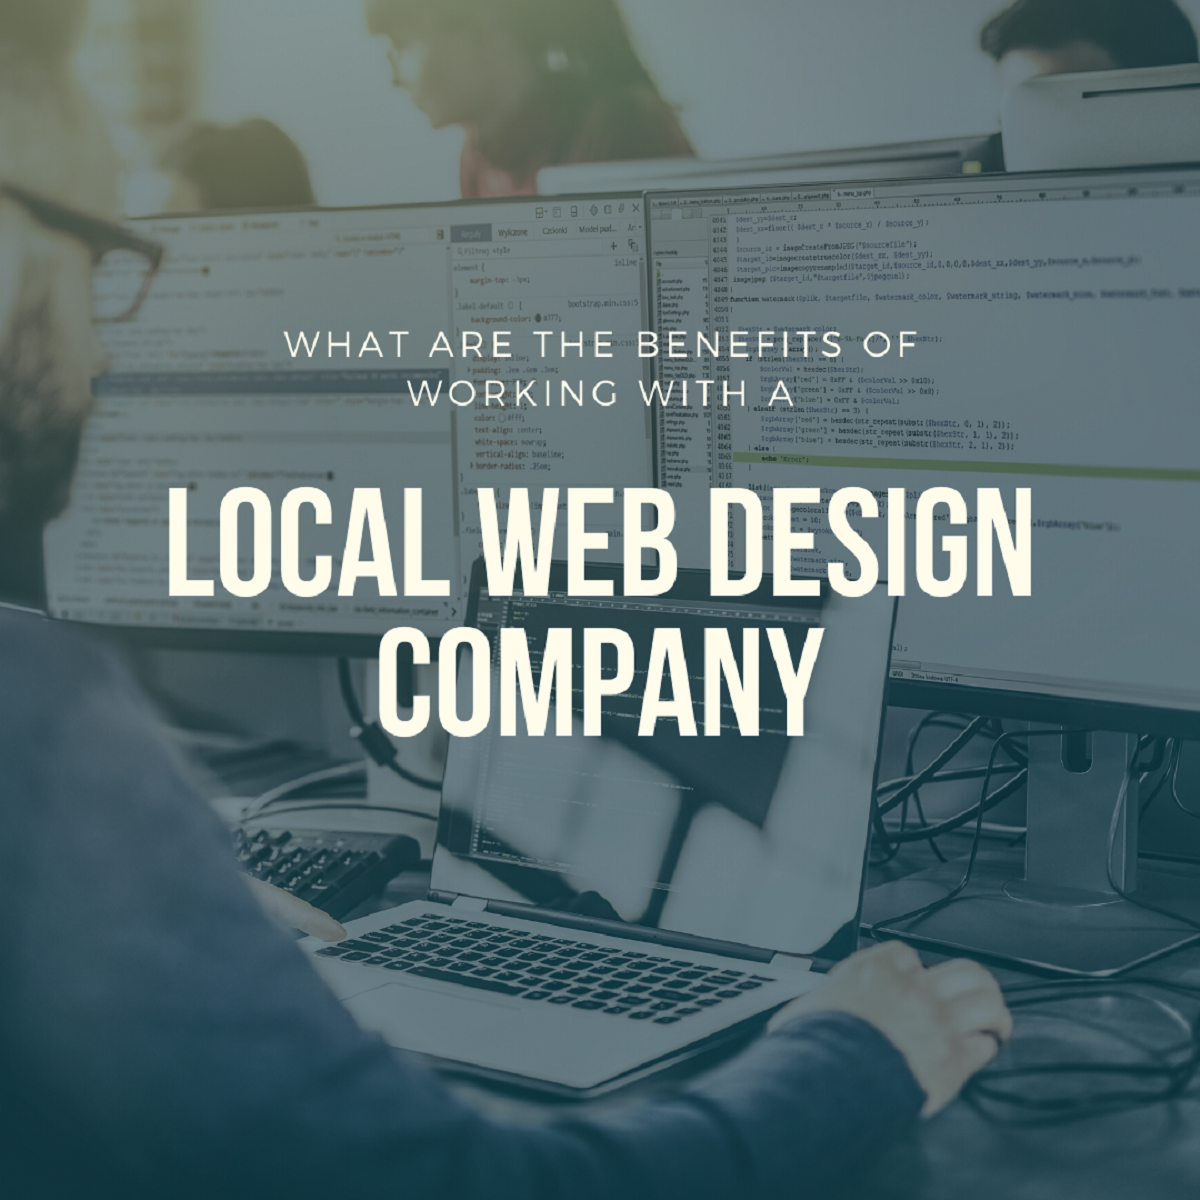 What Are The Benefits of Working With A Local Web Design Company